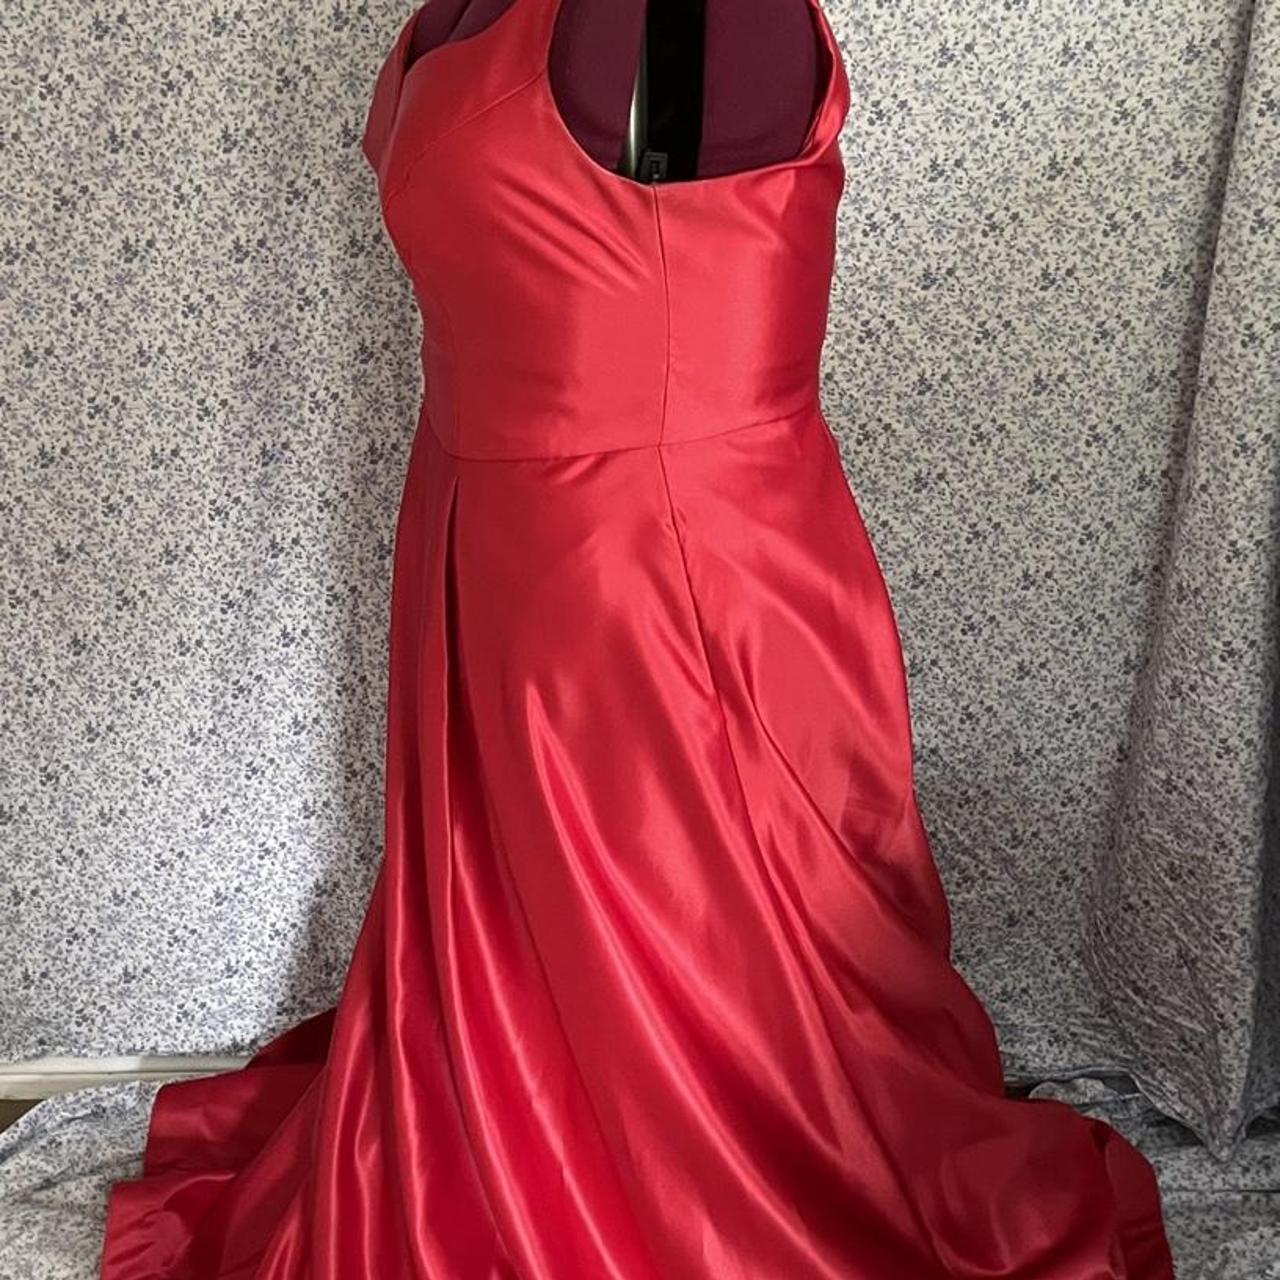 Red satin prom dress WITH POCKETS!!! This was my... - Depop